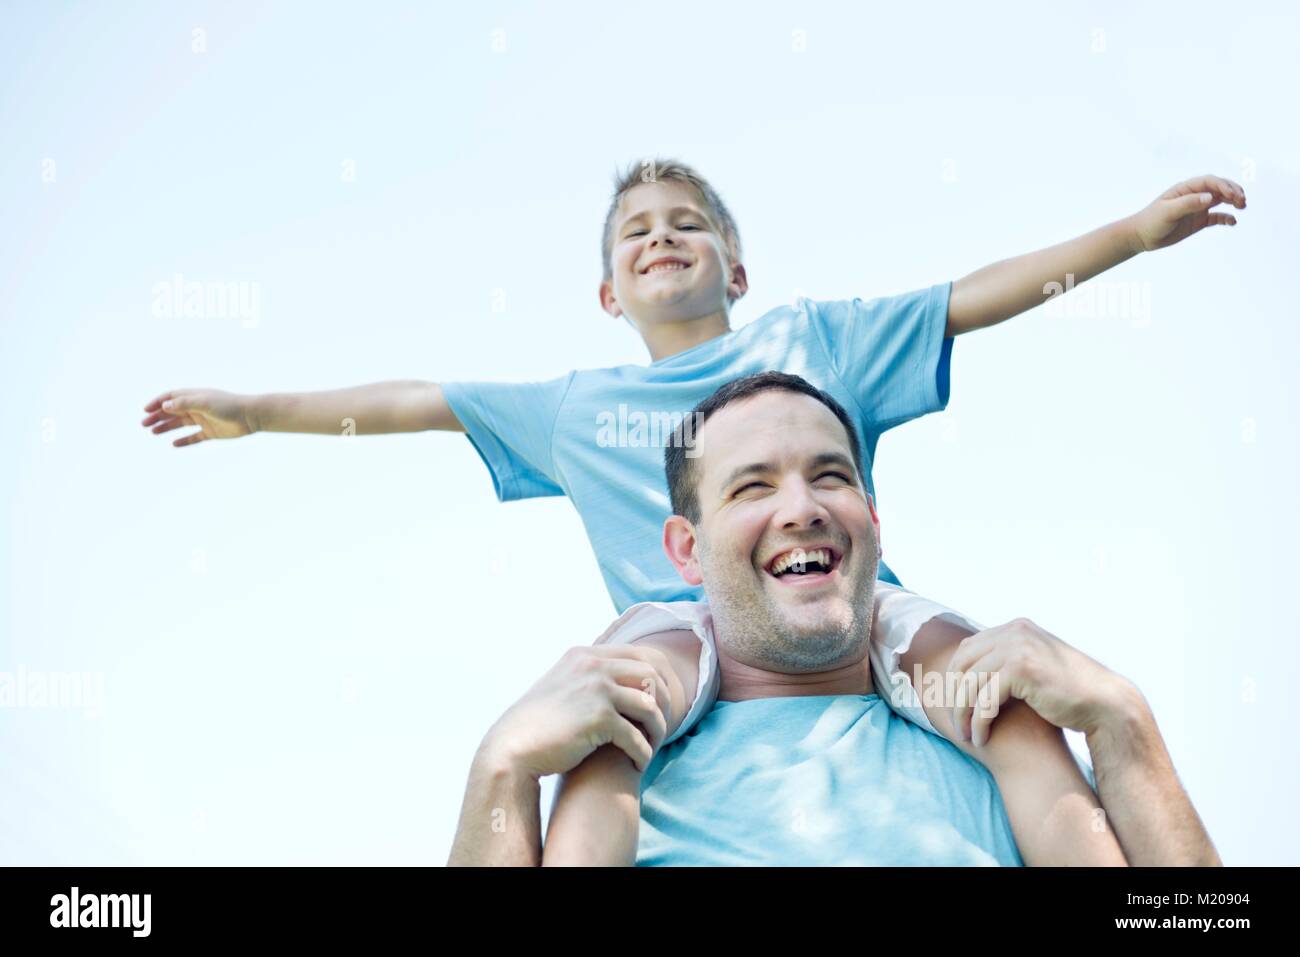 Father carrying son on shoulders, boy with his arms out. Stock Photo